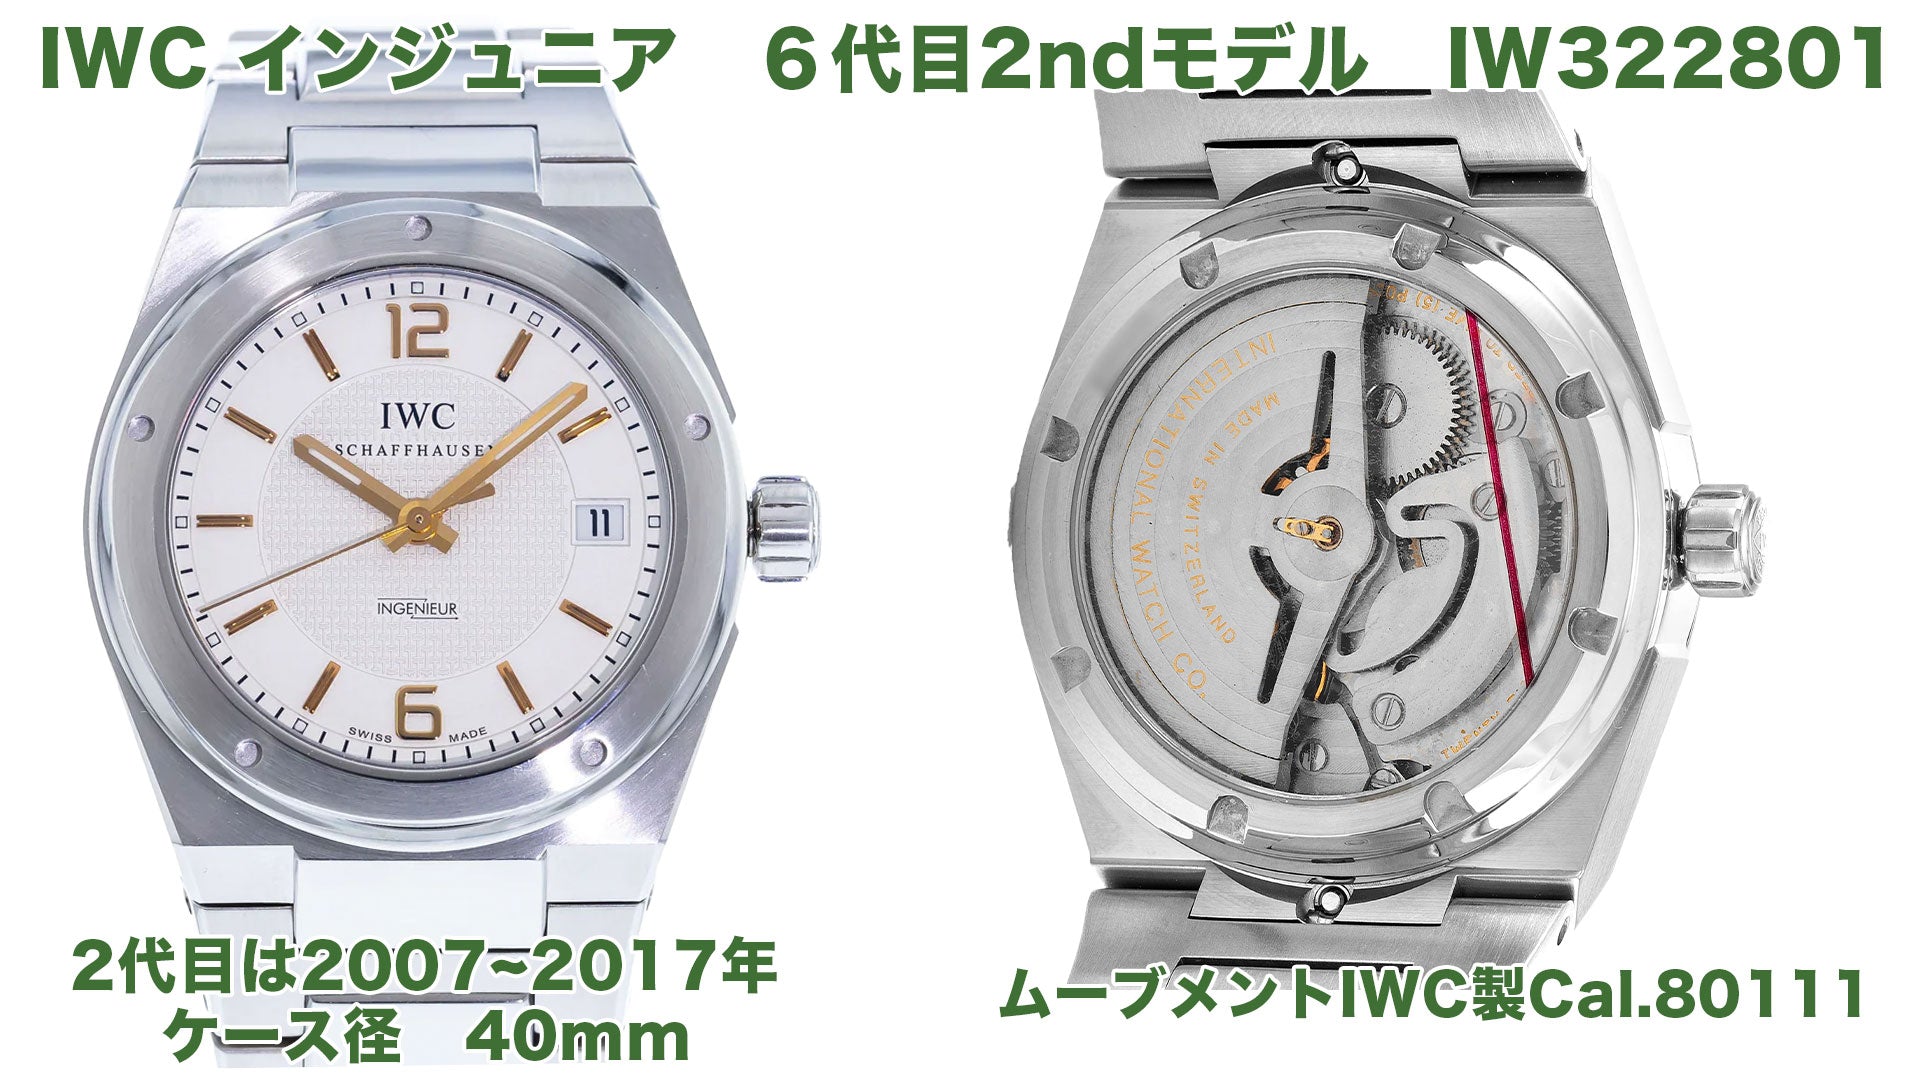 IWC Ingenieur 6th generation 2nd model IW322801 and cal.80111